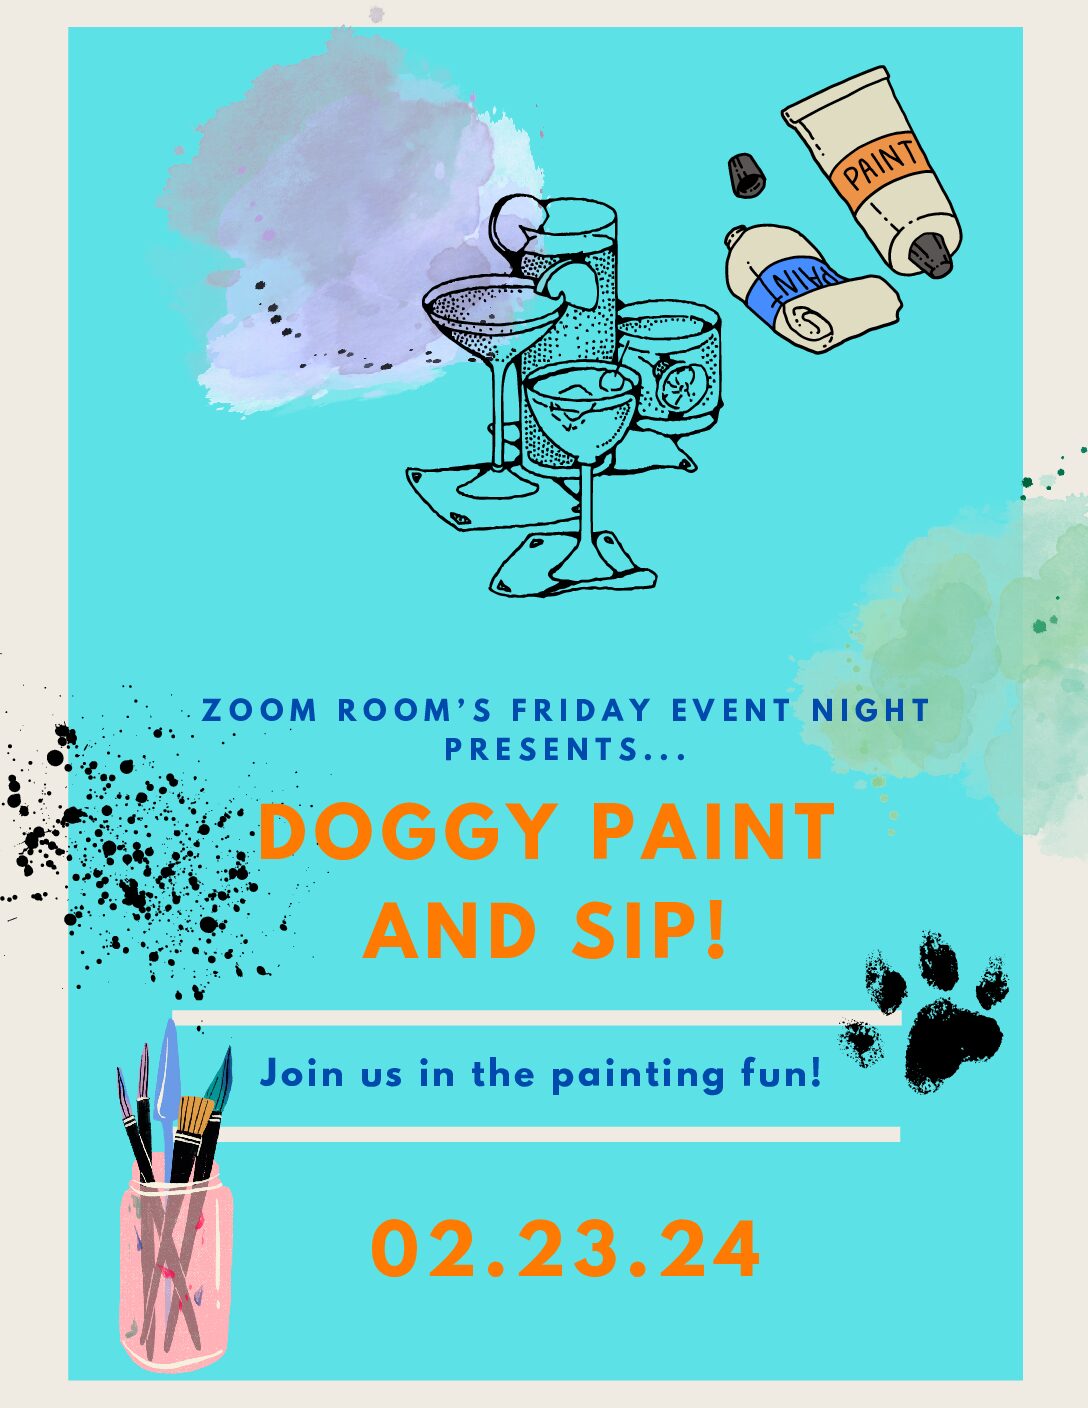 Doggy Paint and Sip